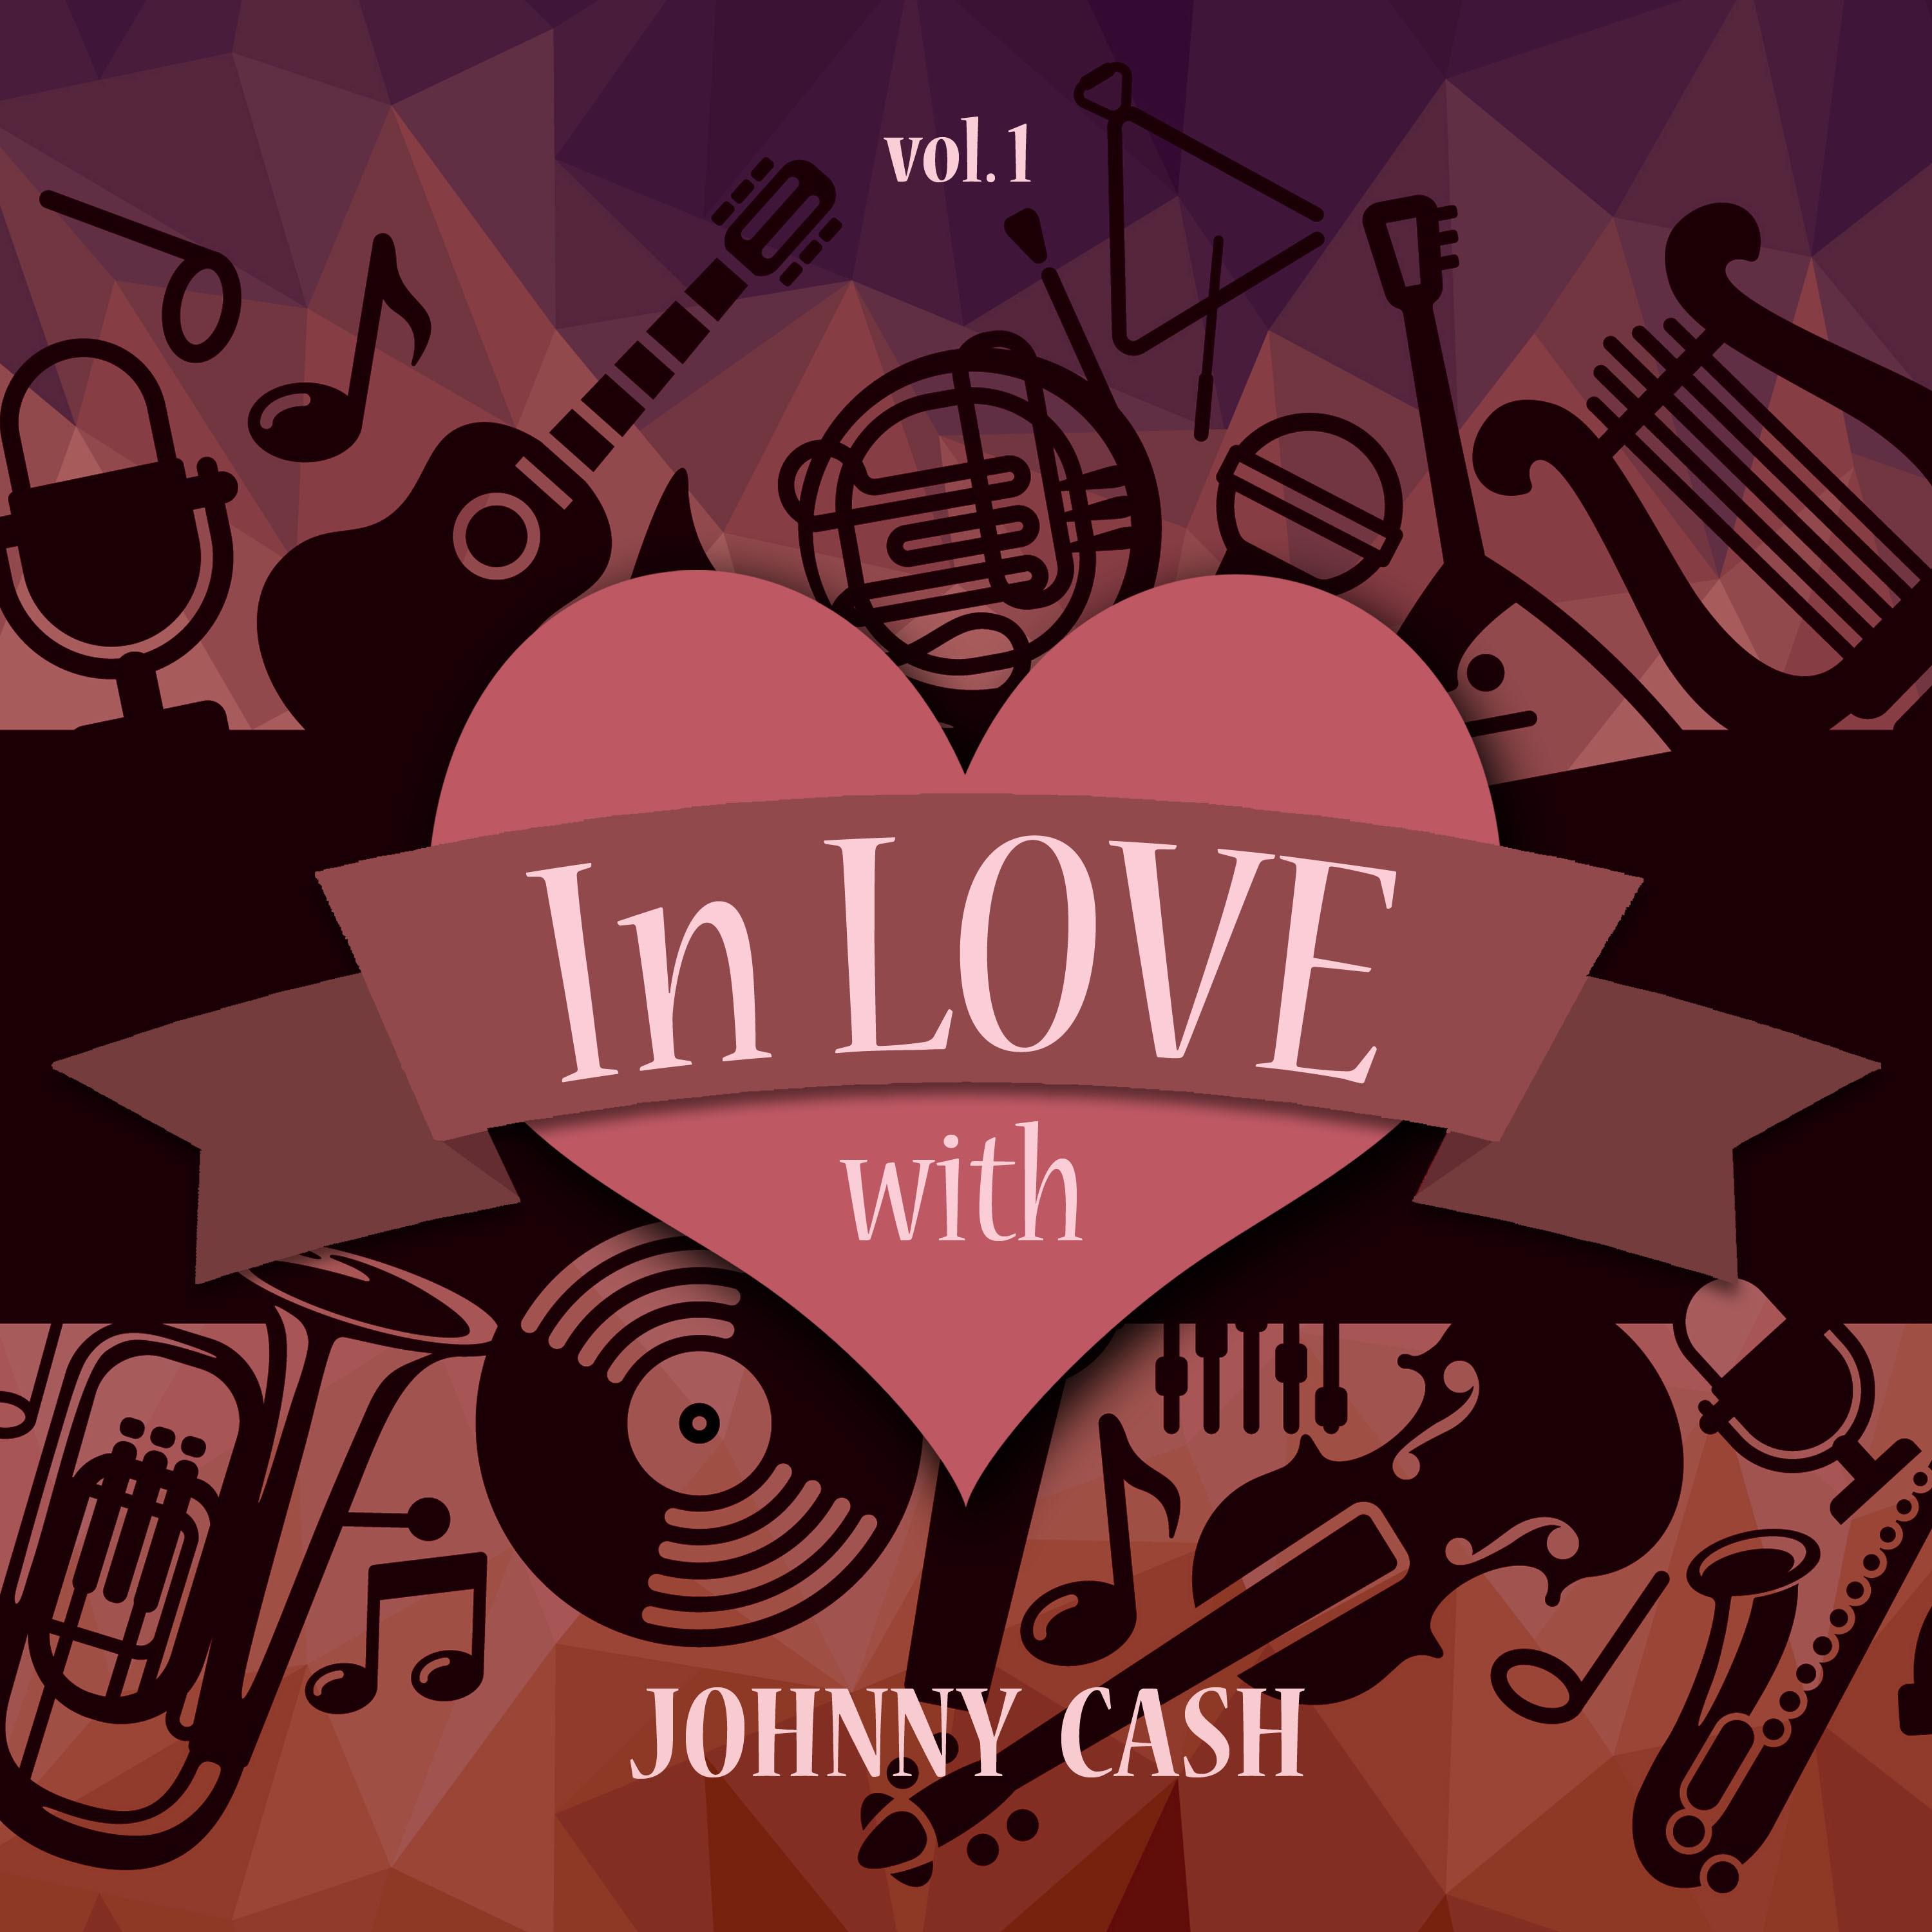 In Love with Johnny Cash, Vol. 1